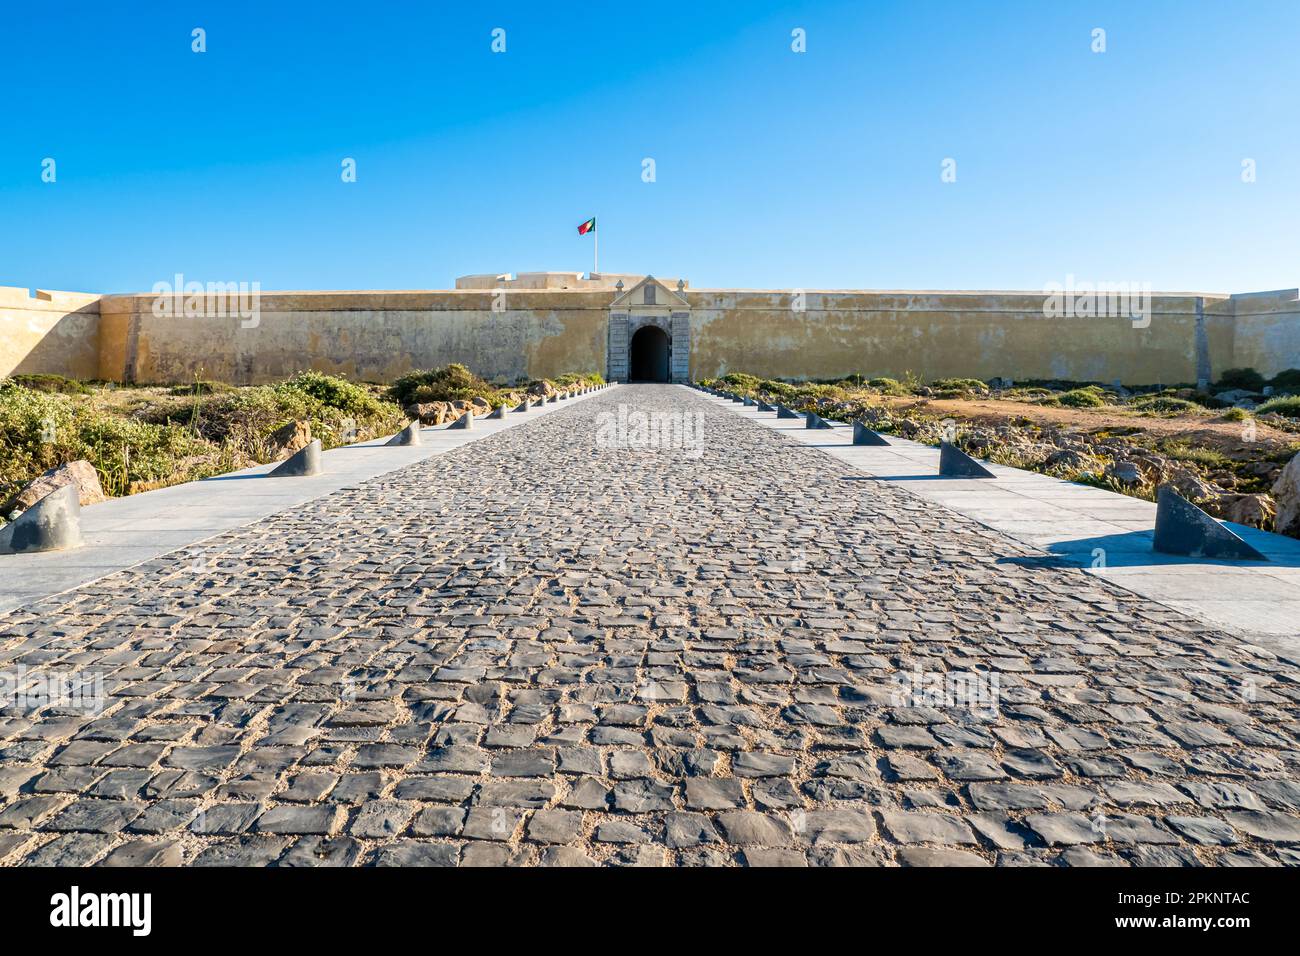 Grand entrance of Fortaleza de Sagres, a historic fortress in the Algarve area of Portugal, is captured in a stunning front view, with a vast driveway Stock Photo